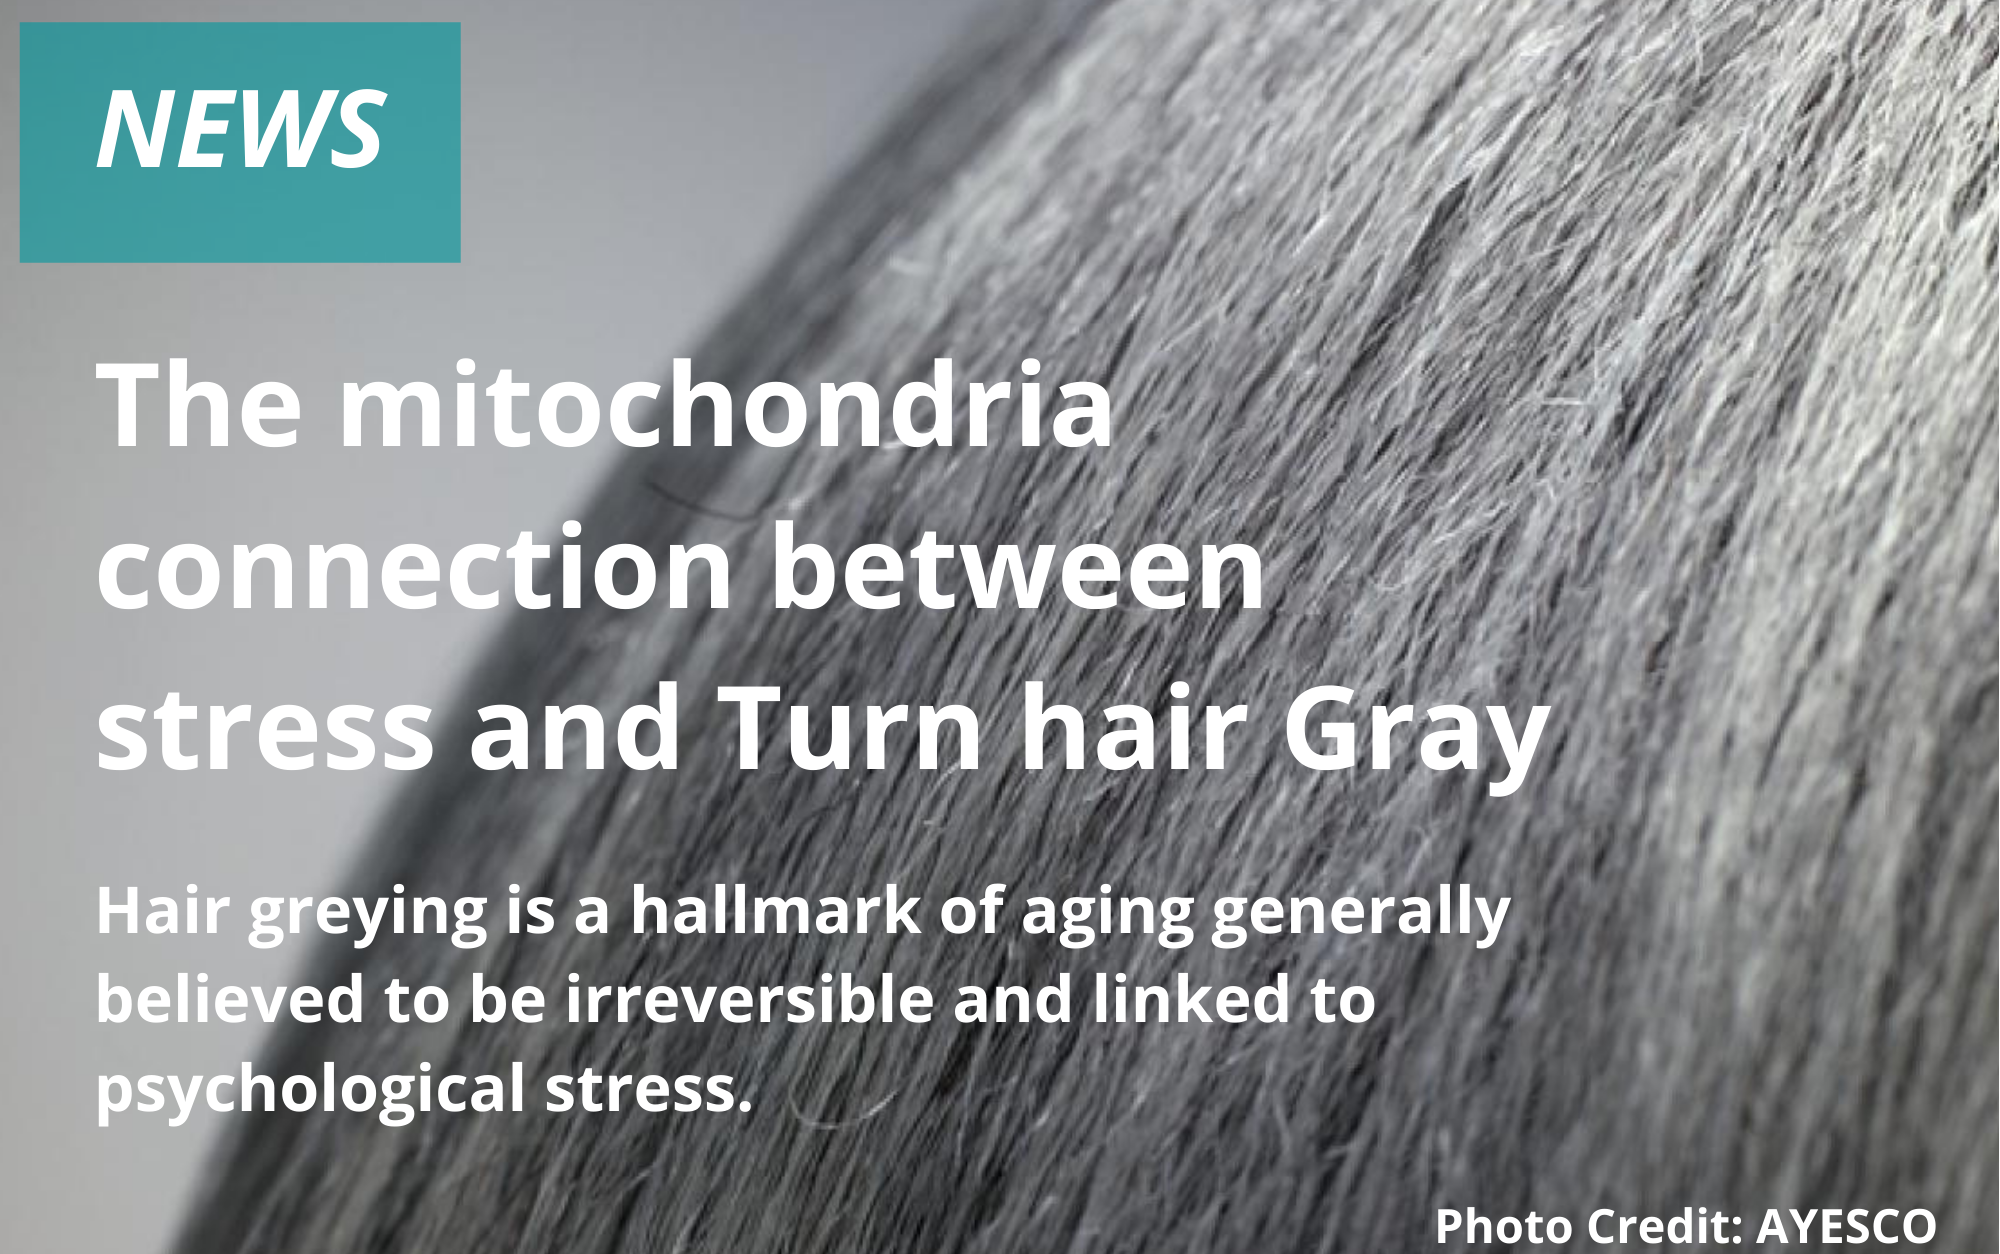 The mitochondria connection between stress and Turn hair Gray